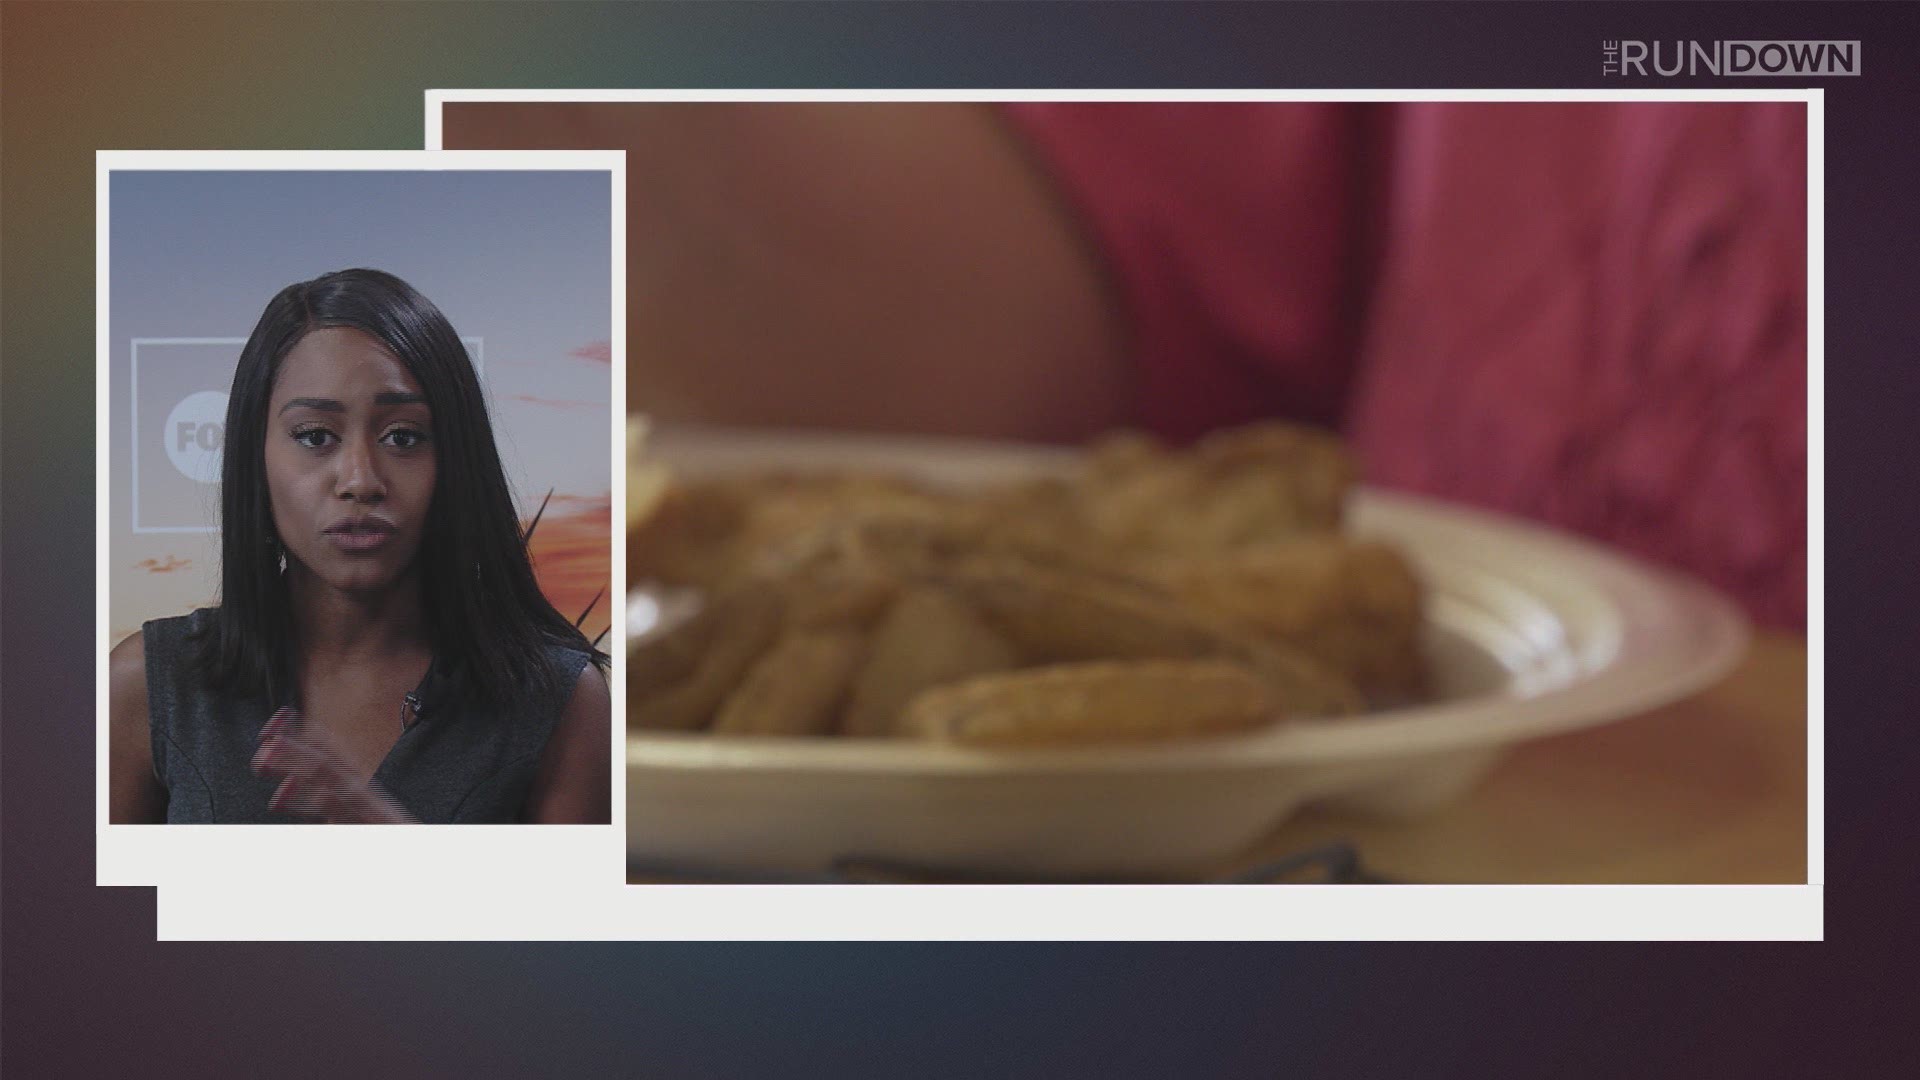 Happy National Chicken Wing Day, many are celebrating by munching on flats or drumsticks , but one woman use to stand behind the fryer and said cooking wings gave her the strength to fly on to better things.